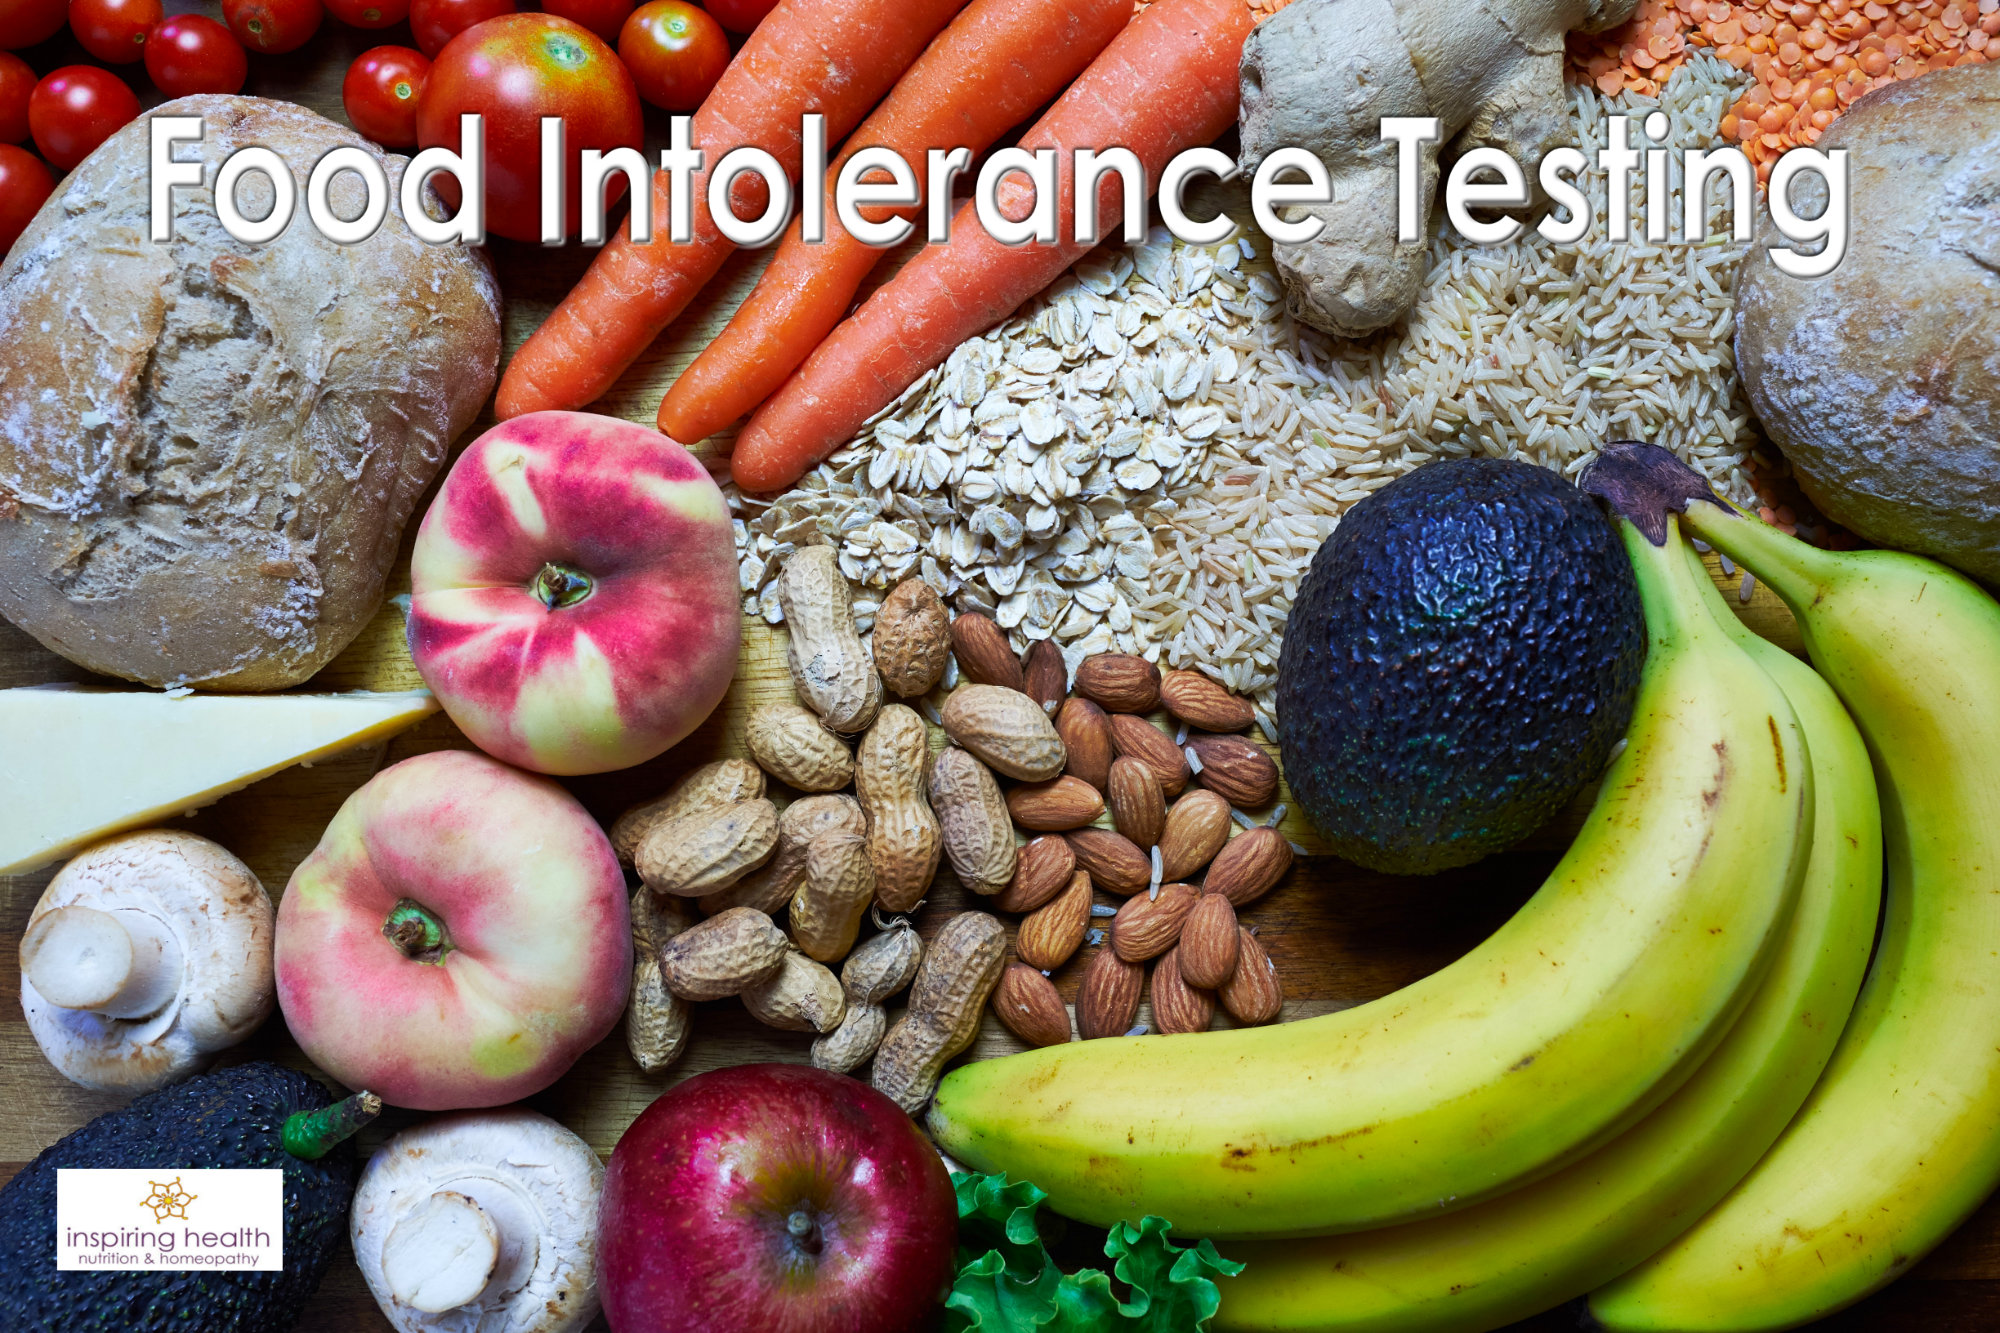 Food Intolerance Testing The Science Supporting Testing For These 5